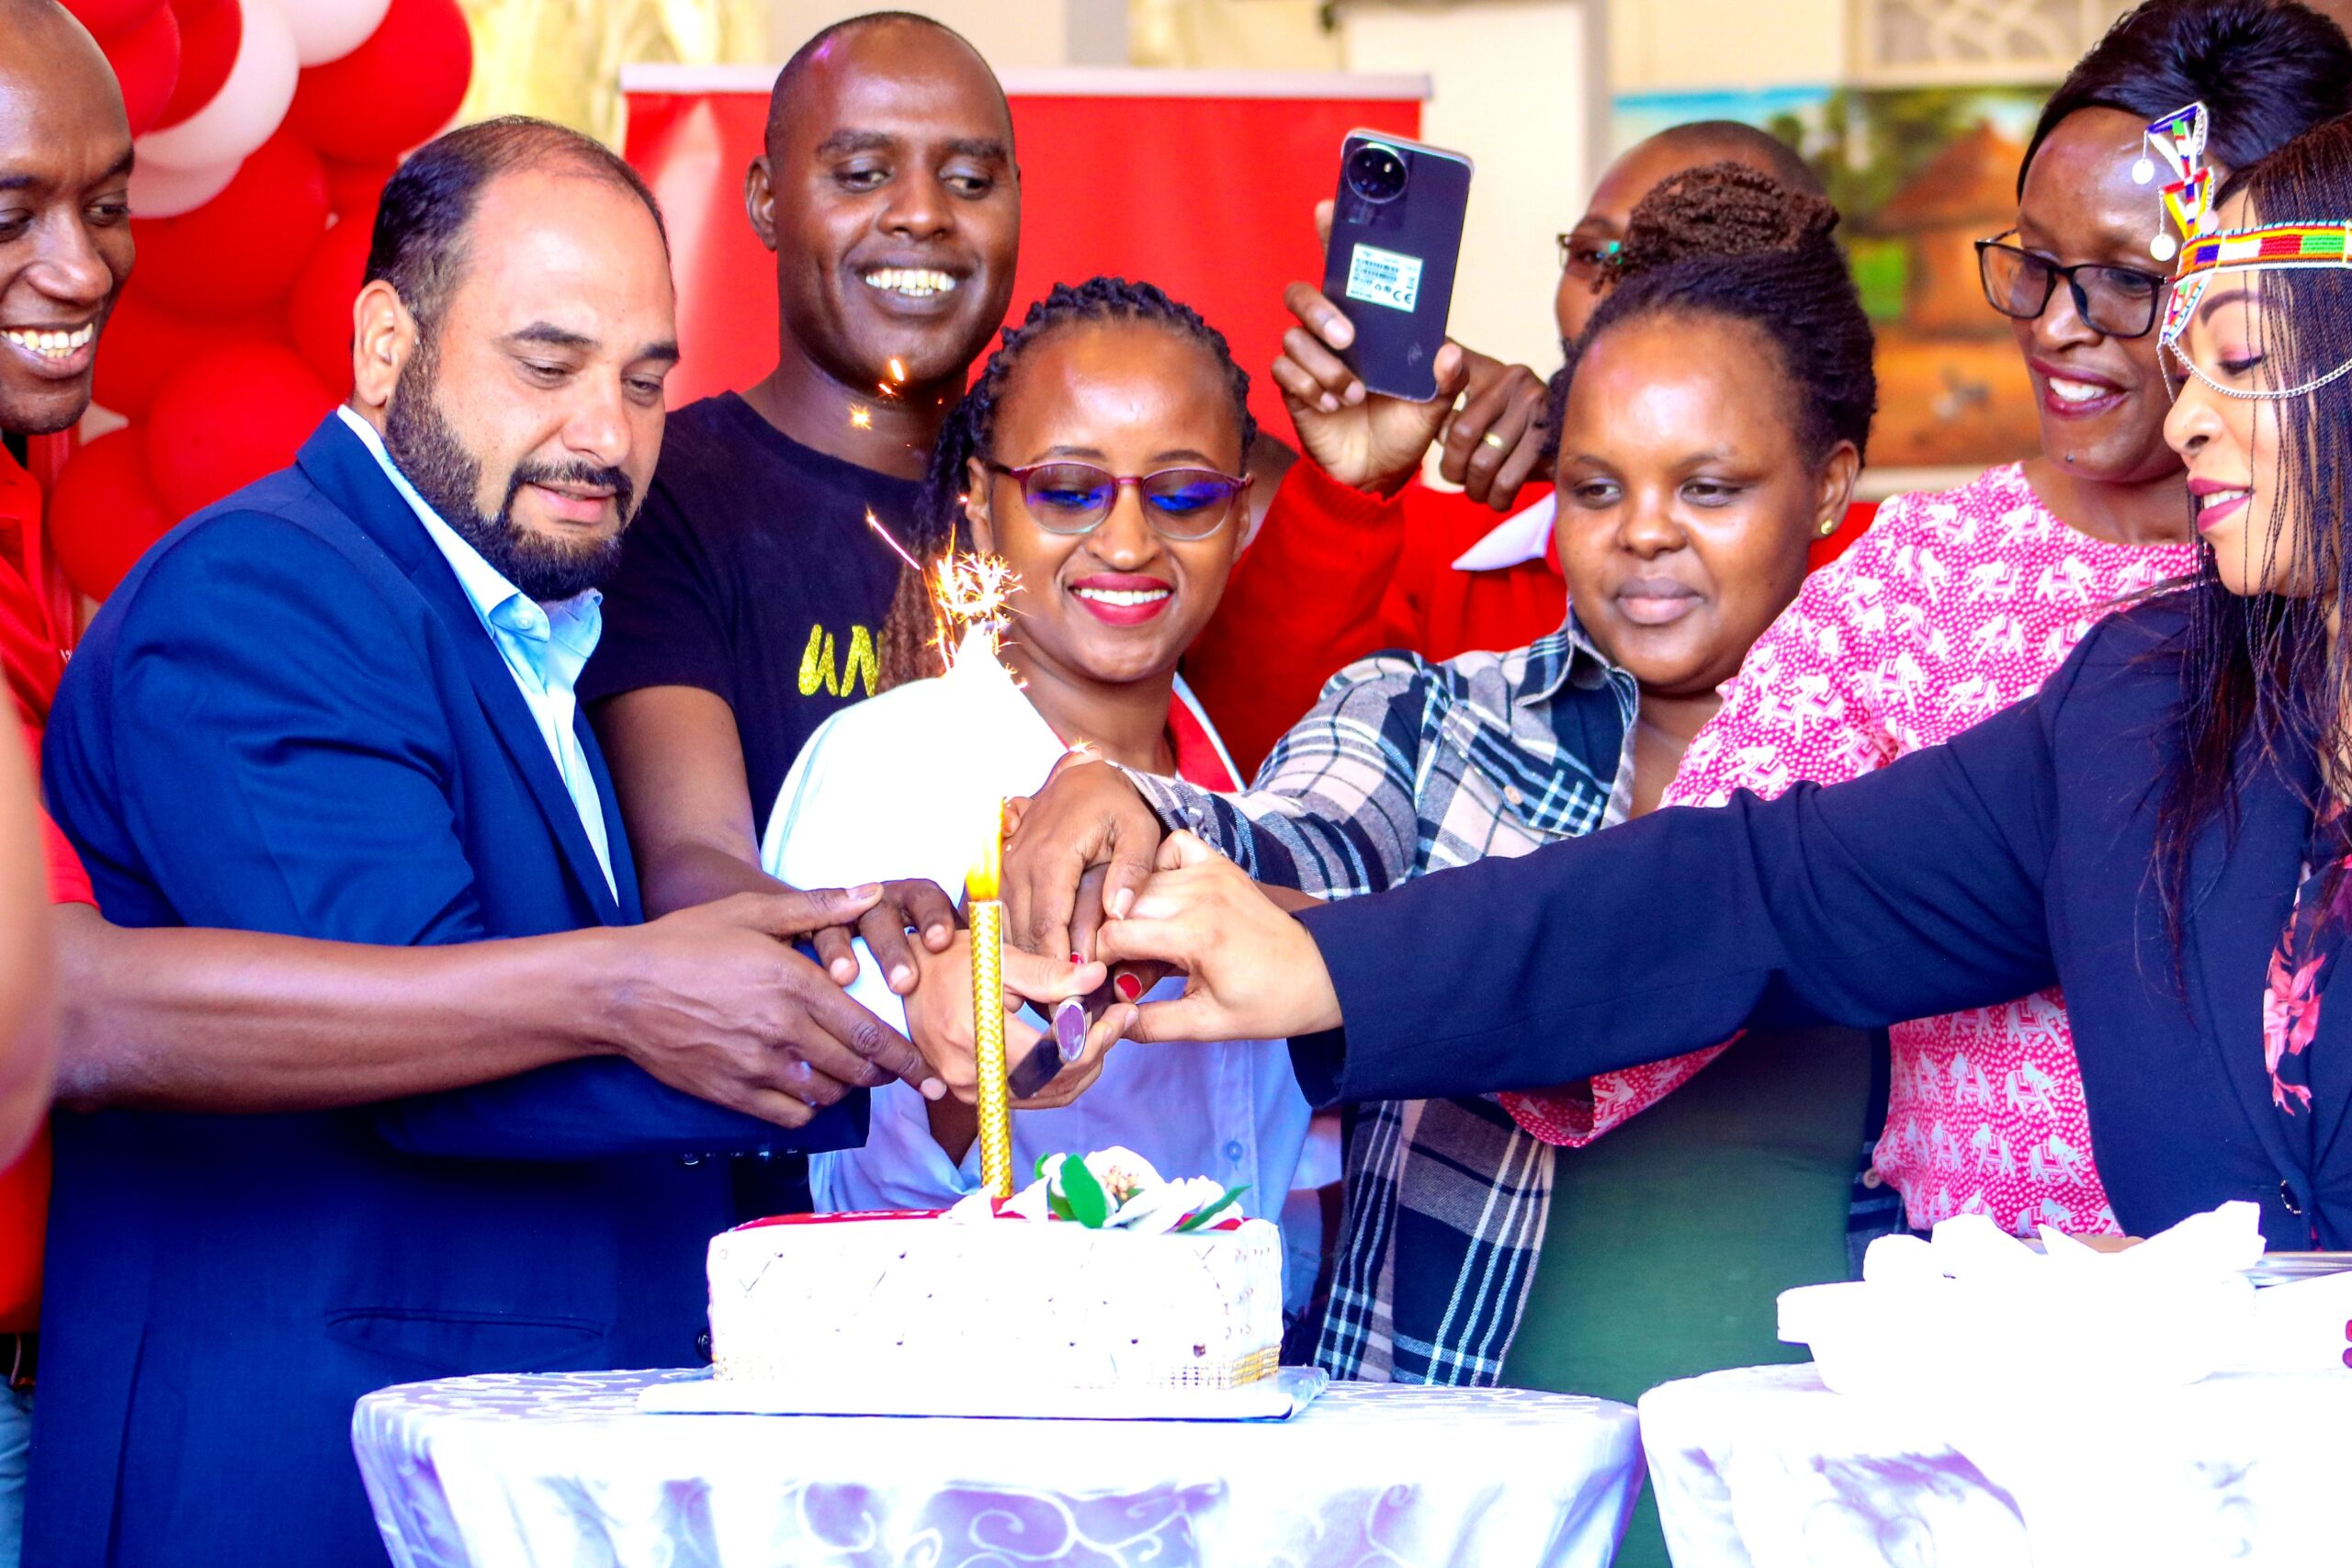 Airtel Kenya MD Ashish Malhotra leads team in cake cutting during the launch of Airtel Customer Care shop in Maralal town.